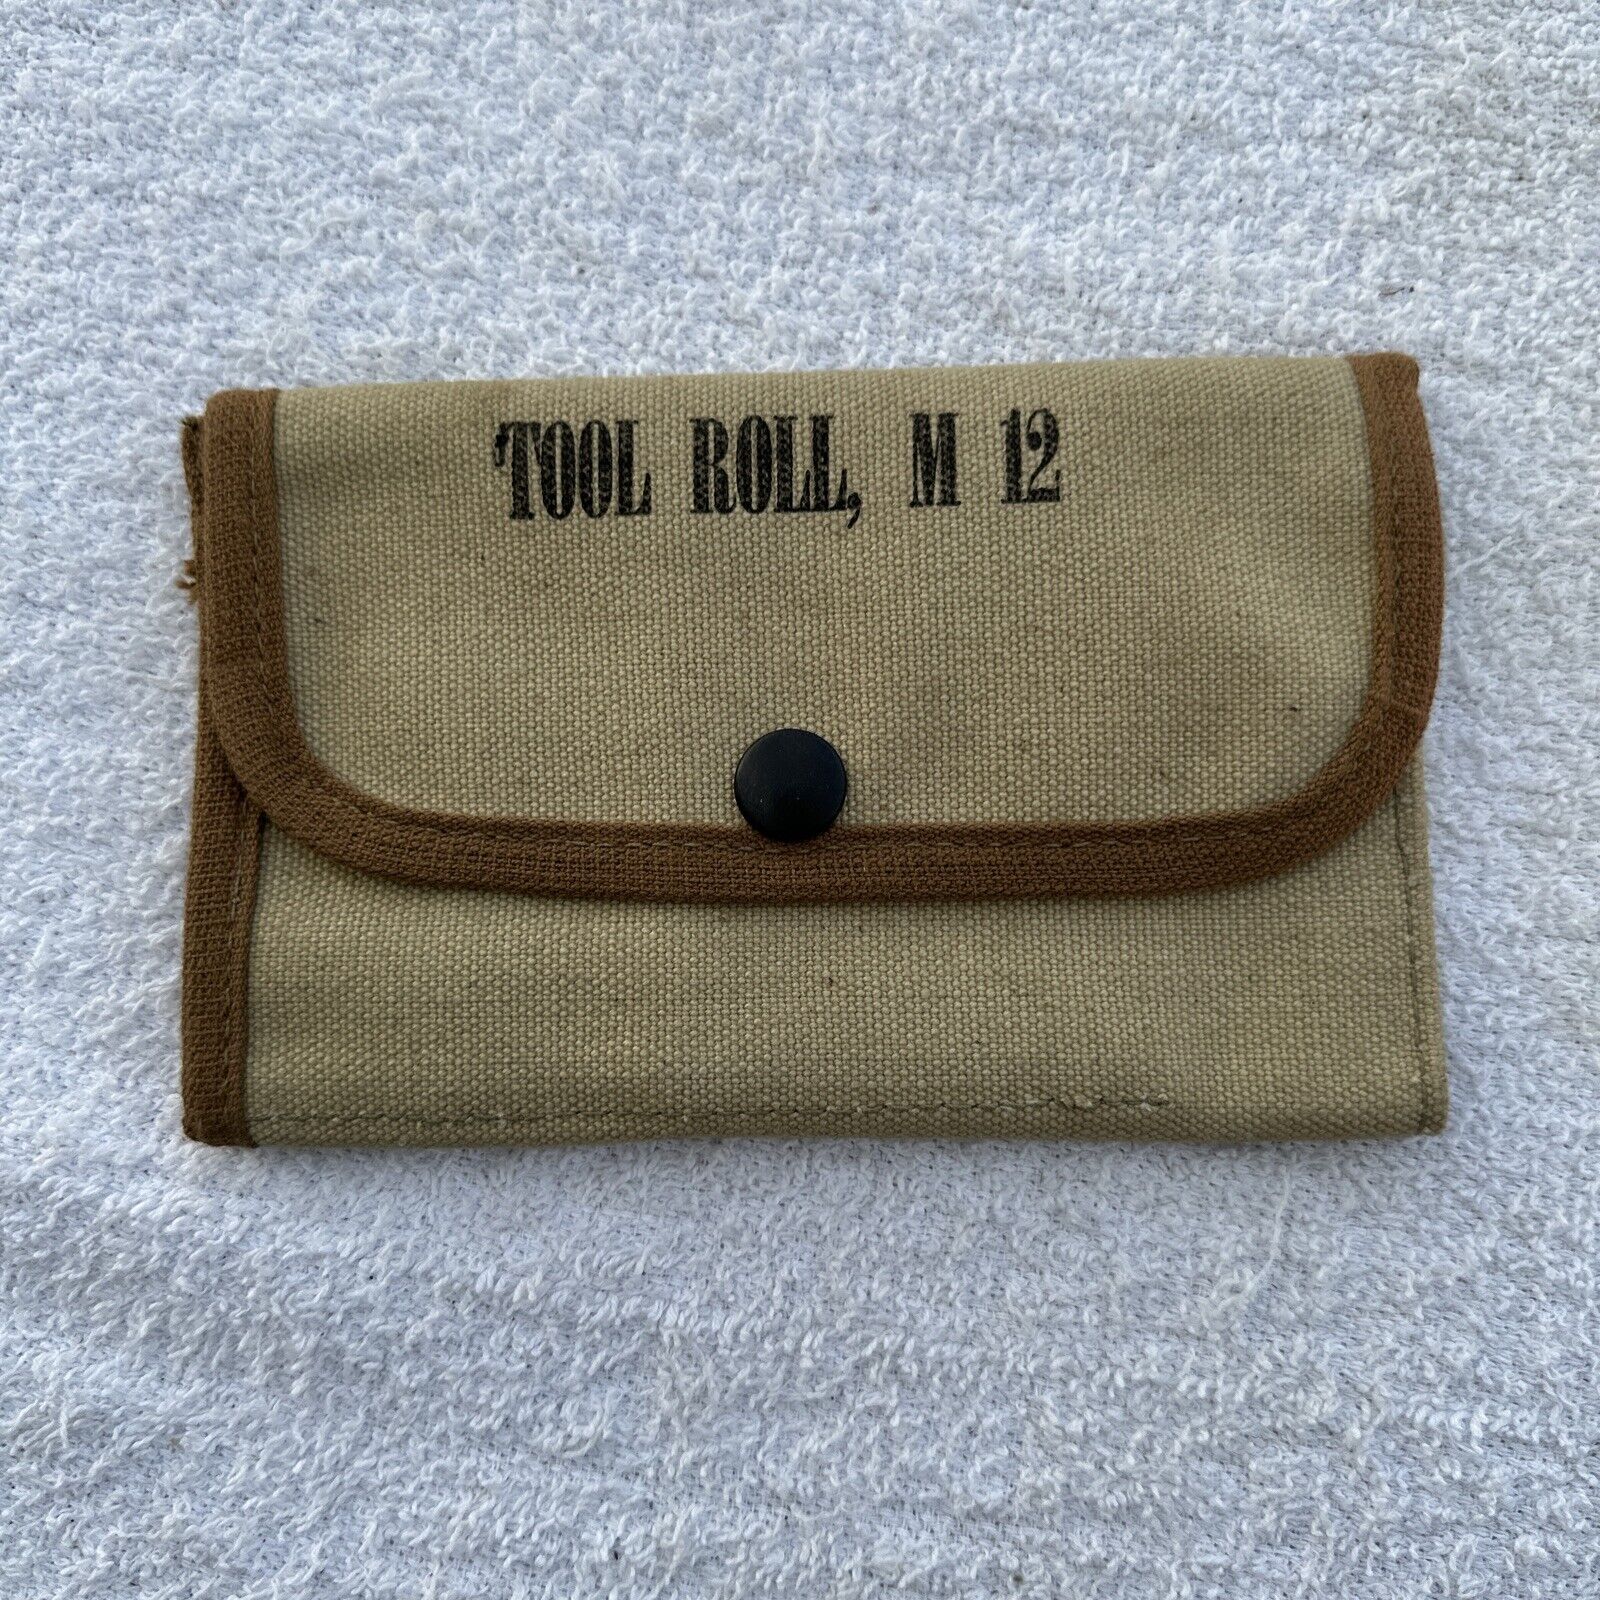 E497. UNISSUED WWII M12 TOOL ROLL KIT FOR RIFLE SPARE PARTS